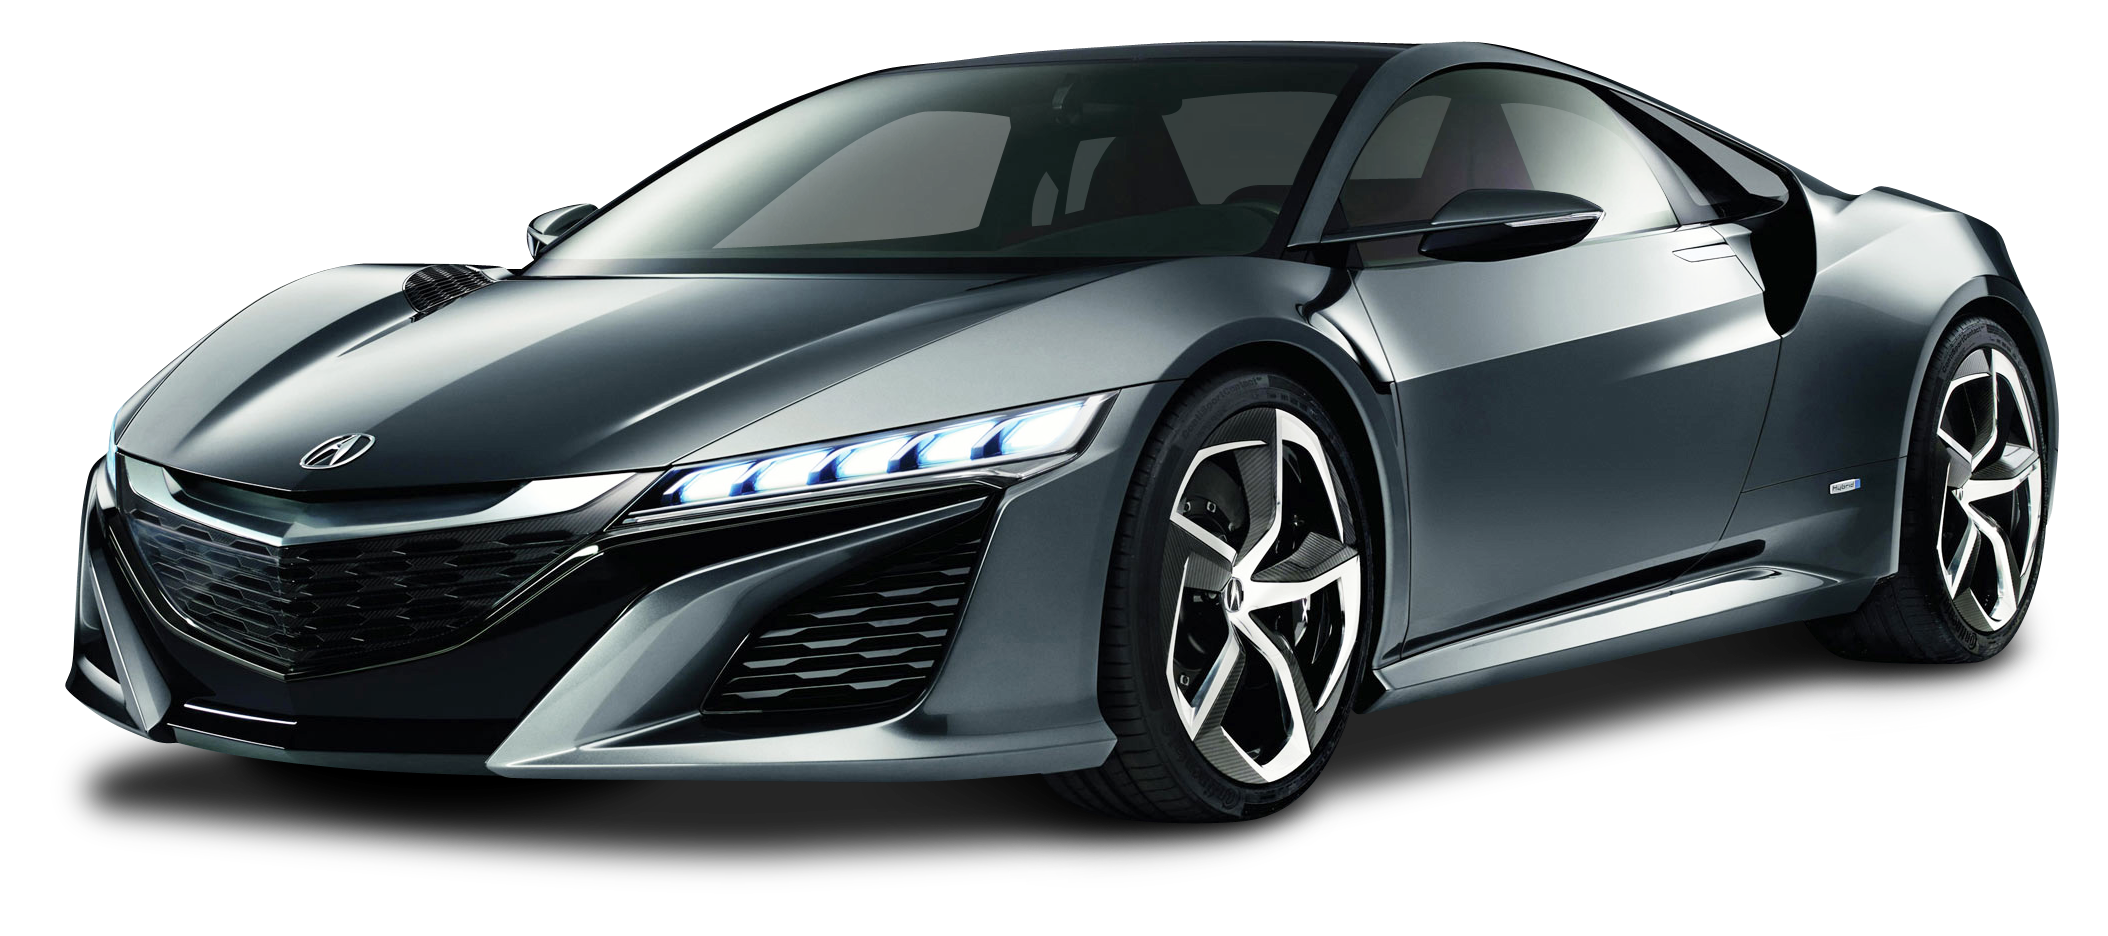 Acura Nsx Car Png Image - Acura, Transparent background PNG HD thumbnail